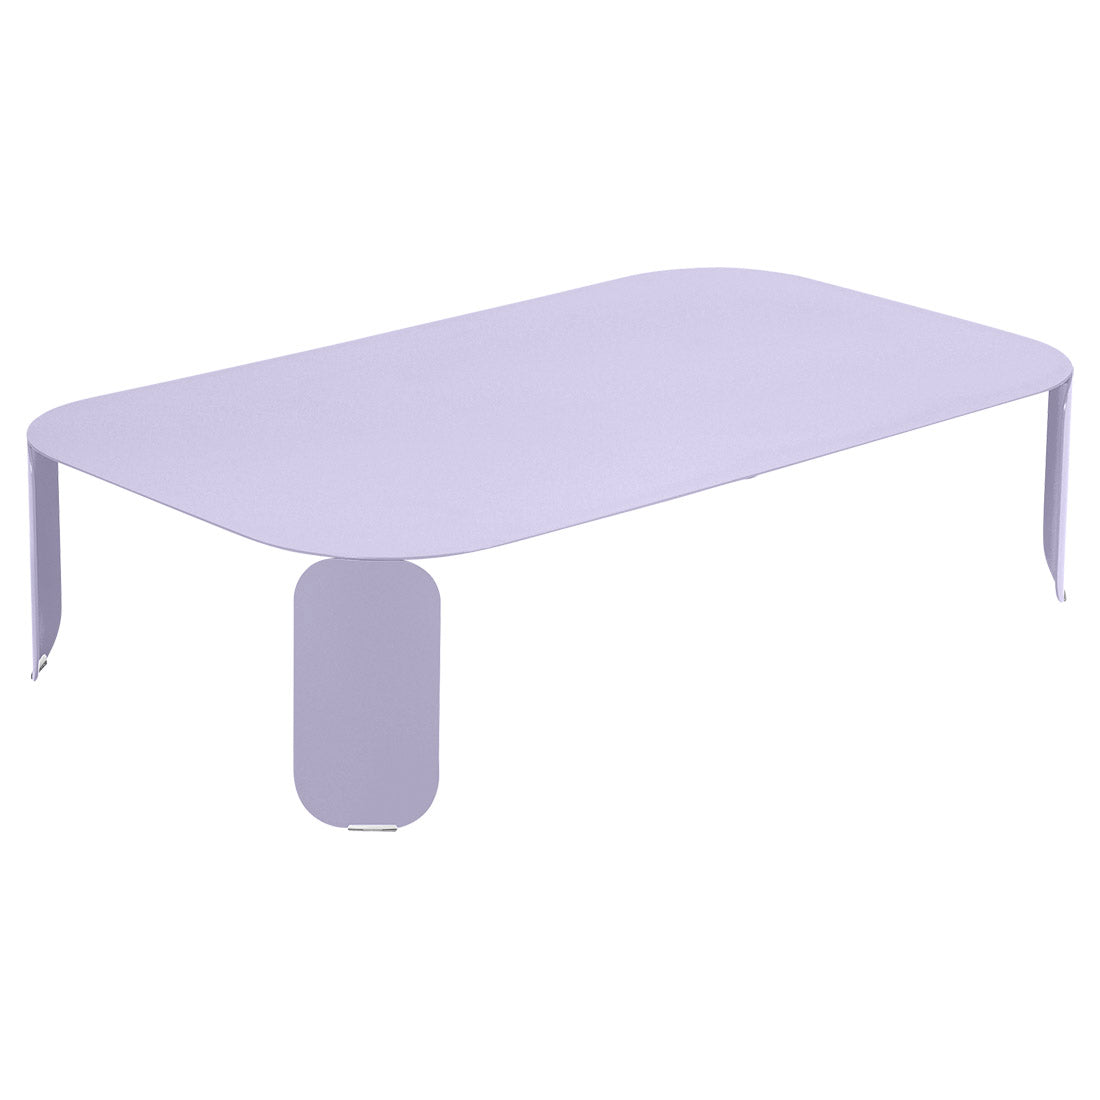 Fermob Bebop 48 inch Rectangular Low Table - 11 in High